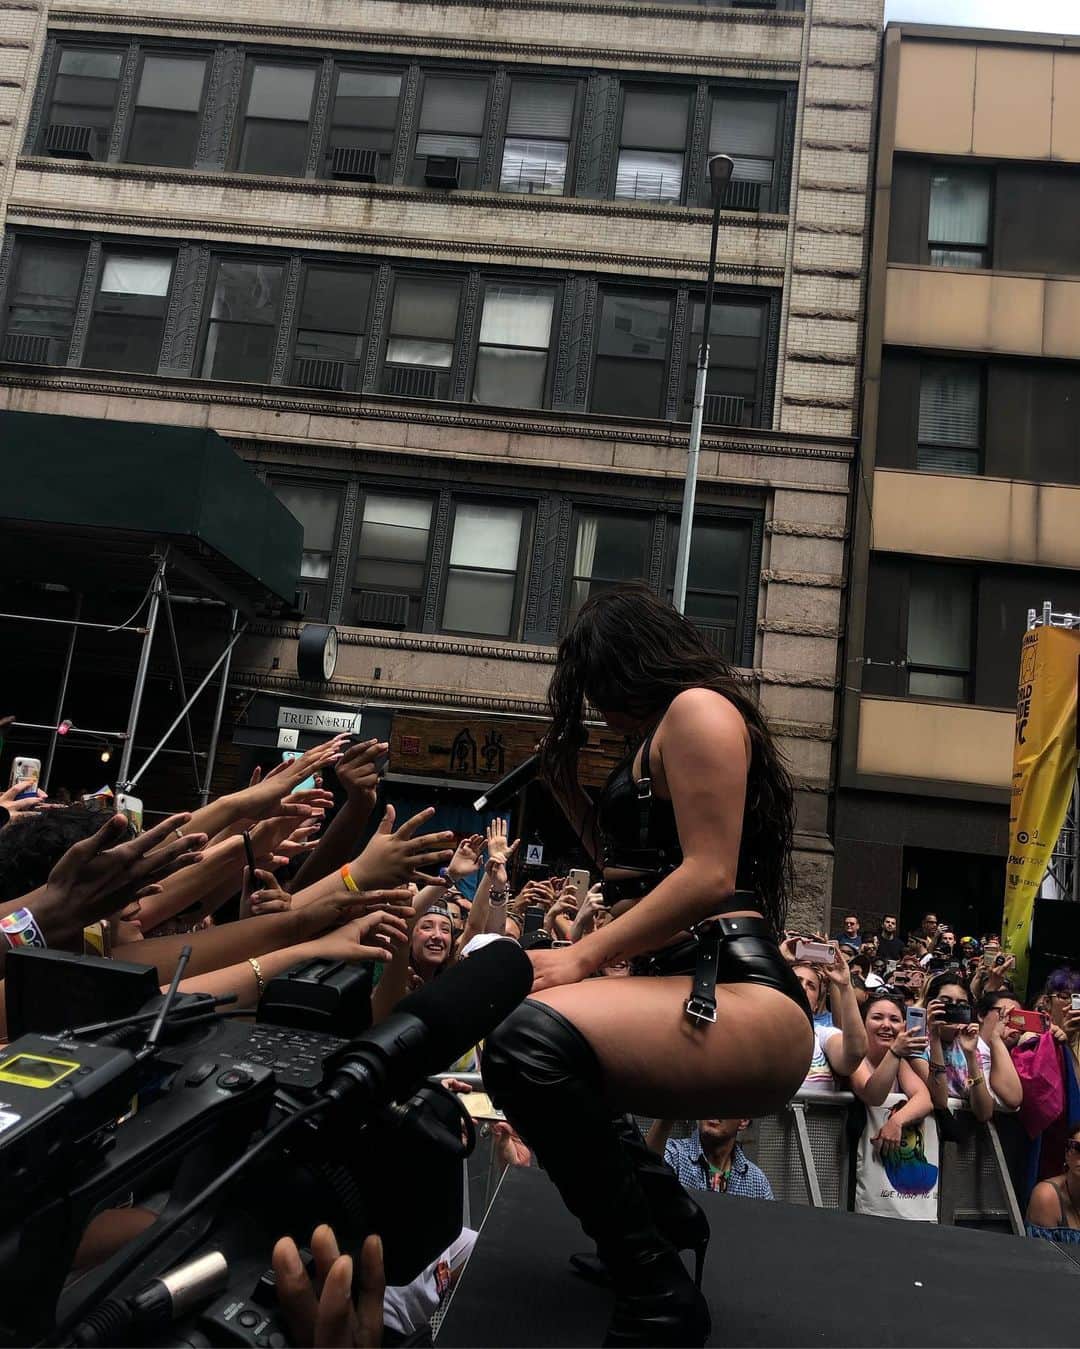 ローレン・ハウレギさんのインスタグラム写真 - (ローレン・ハウレギInstagram)「Thank you so much to @nycpride for having me as a performer last weekend!! My insta has been freaking out so I apologize for the late post but I just want to express how GRATEFUL! I am for this experience and for my incredible fans that showed up to support and my incredible team for being so professional and badass, and my friends and family for being there with me. This performance marked the beginning of a new era with a new team and a brand new energy and I just wanna take the time to thank them!  @iamaishafrancis for being a QUEEN and not only choreographing but also making sure each and every detail was thought of/handled. Like a BOSS. @brynnsamms for her assistance with that, @scotlouie with the incredible outfit! My amazing band of bad bitches @octodaddio on the keys, @elenacdrums on the drums, and @theangieswan on guitar. @manvmaschine my production manager, @auraloptical on playback, @_nfg on sound, @koreyfitz hair, @kaleteter with the beautiful rainbow eyeshadow look, my beautiful dancers for getting their LIFE w me! @officiallydes @cousley.dance ! And last but not least @melodicstar and @eawbrey my new management who handled all obstacles/stresses/blessings with so much grace and positivity! I know we’re going to do incredible things together and I’m so grateful for you all! It was technically my first #PRIDE and I was surrounded by my friends and family and the love I felt and received as I walked through those streets reminded me that LOVE truly is the frequency we’re meant to exist in, whatever that means for each of us. I hope you all enjoyed the performance too!(: what’d you think of ‘Burning’? It was my first time performing it and I was kinda nervous af lol but the song is amazing and @cleareyesmusic_ produced it and I wrote it and it’s about my love for girls🙈 LEMME KNOW WHAT YOU THINK!」7月5日 0時47分 - laurenjauregui